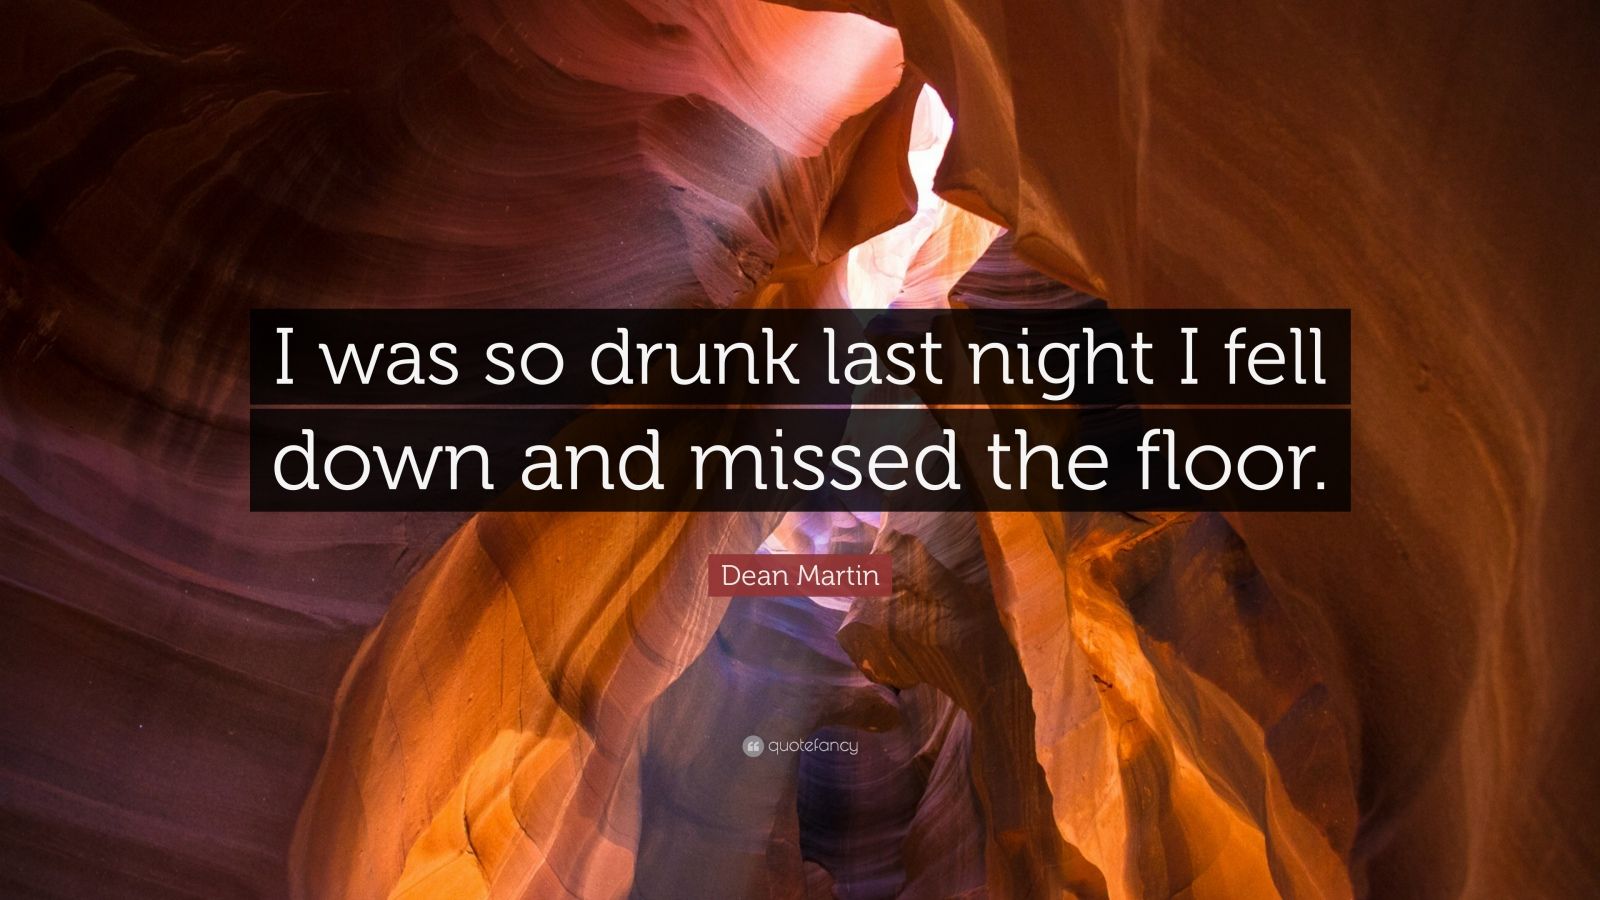 Dean Martin Quote: “I was so drunk last night I fell down and missed the floor.”